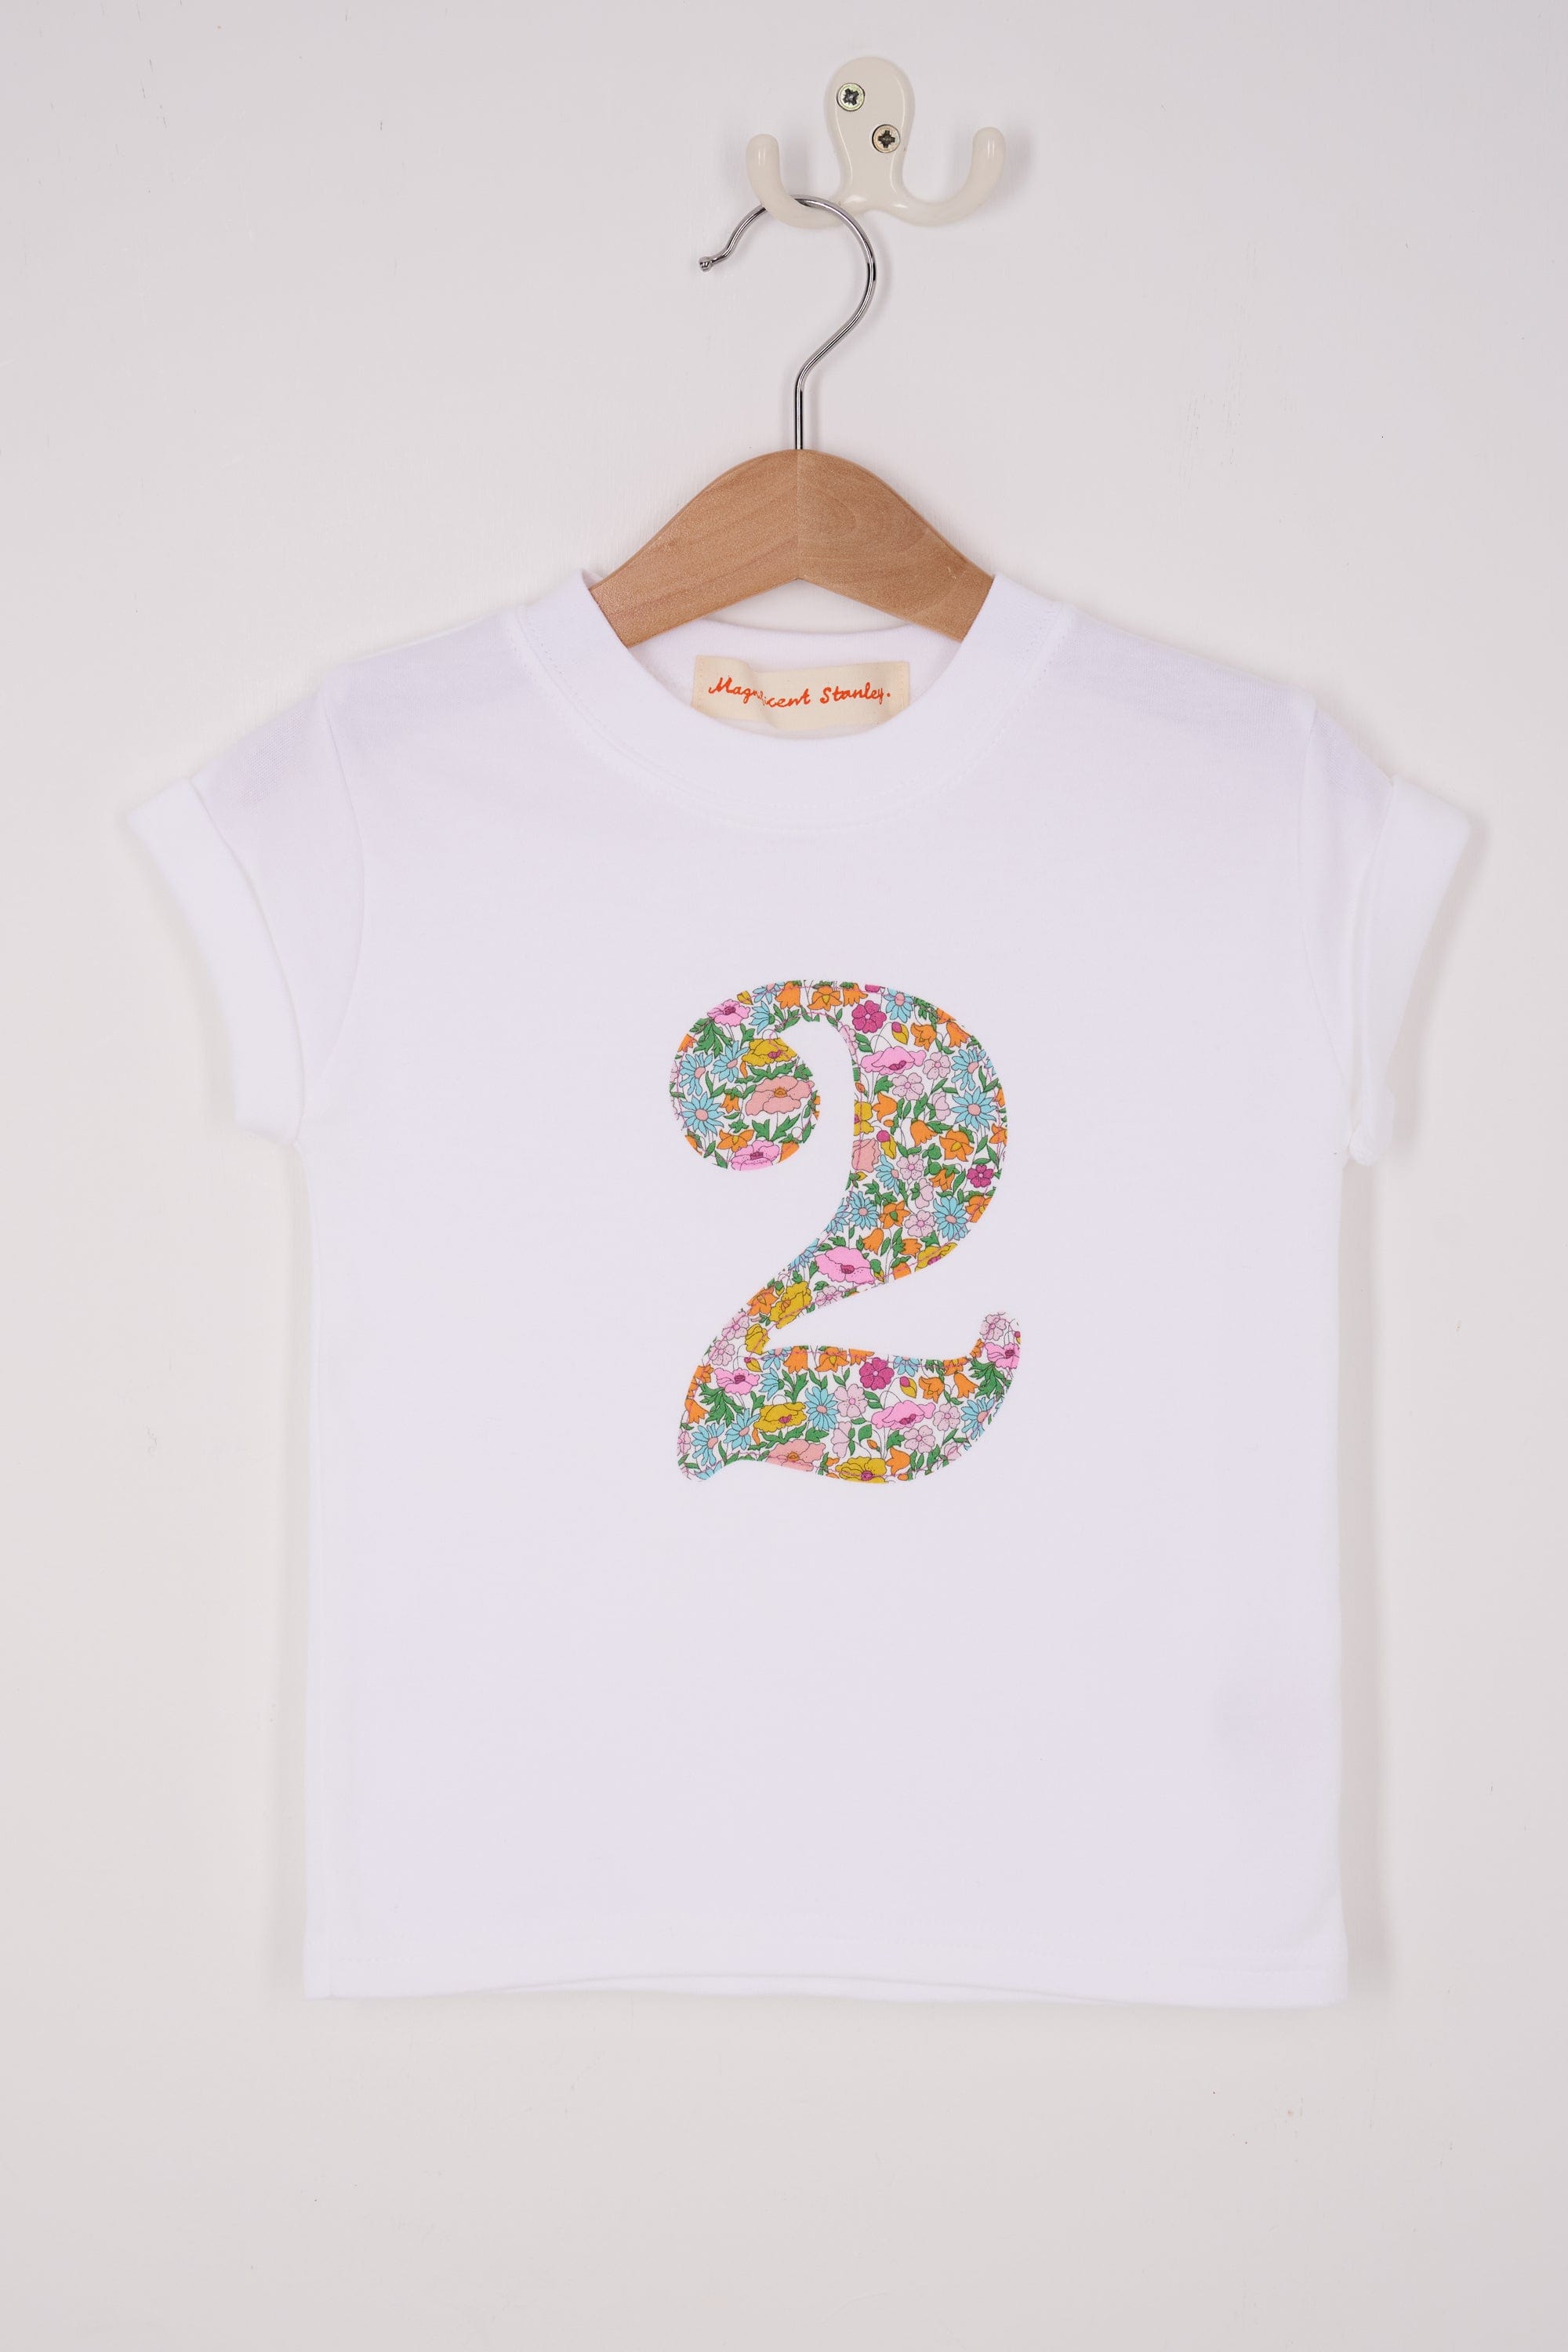 Magnificent Stanley Tee Number White T-Shirt in Poppy Forest Liberty Print